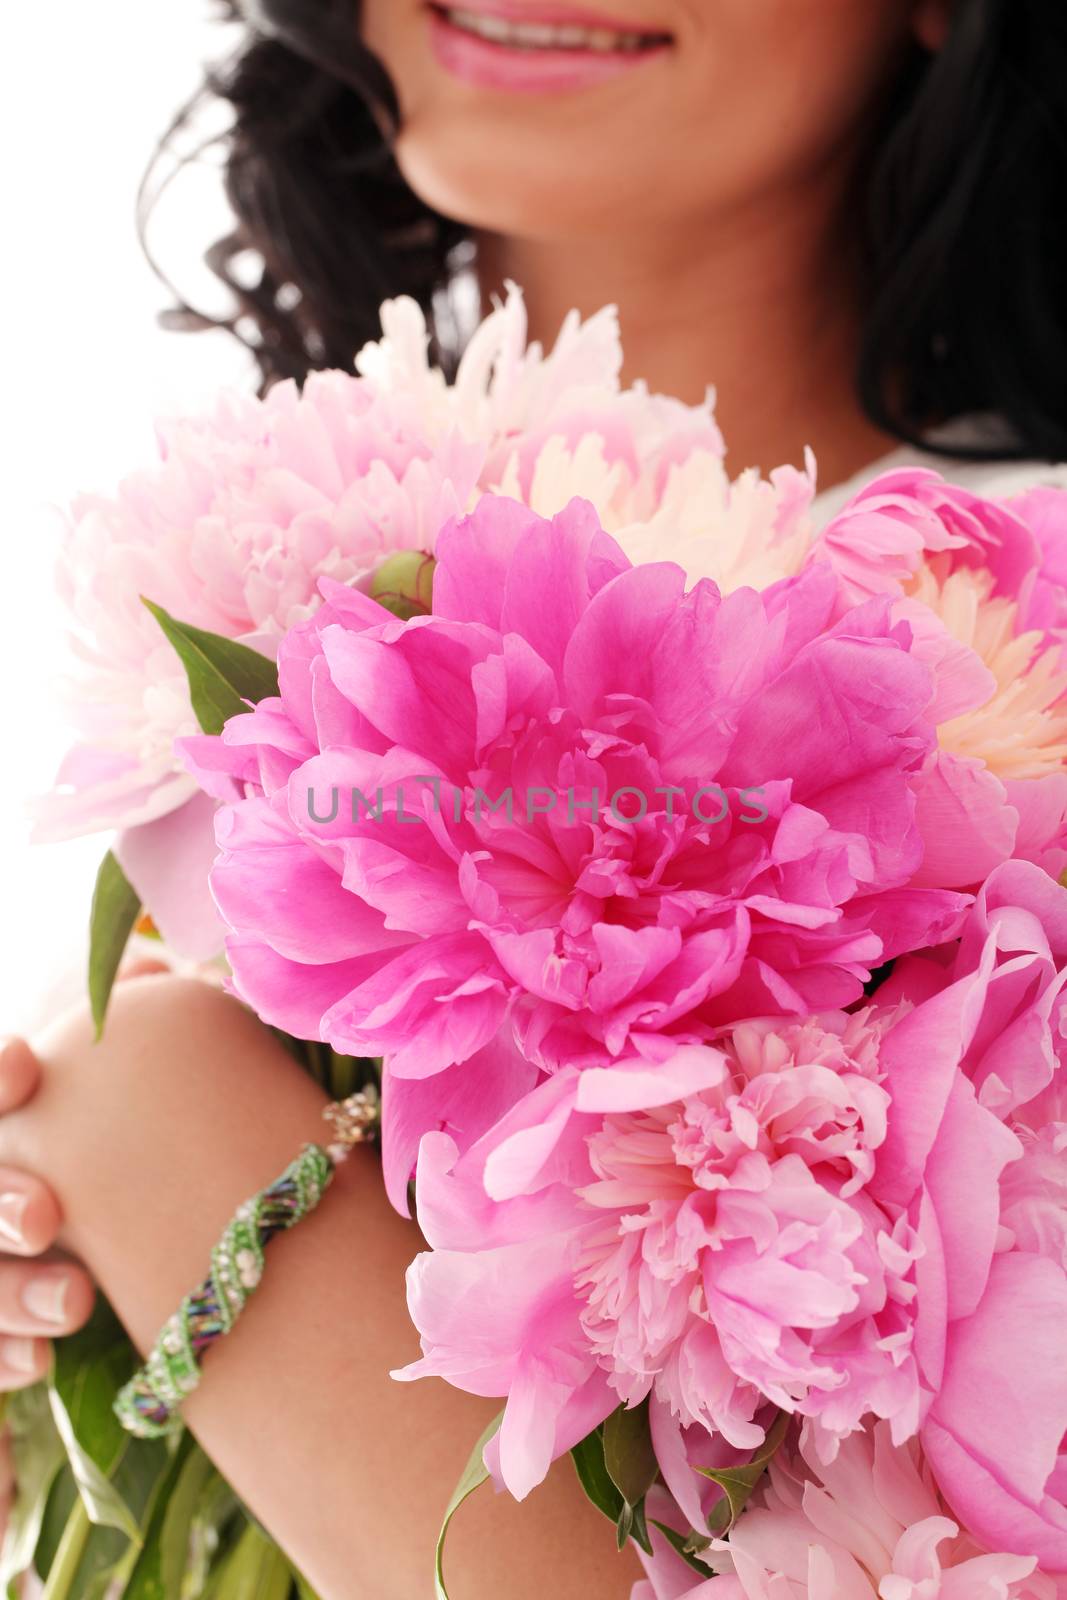 Bouquet of peonies in woman's hands by rufatjumali